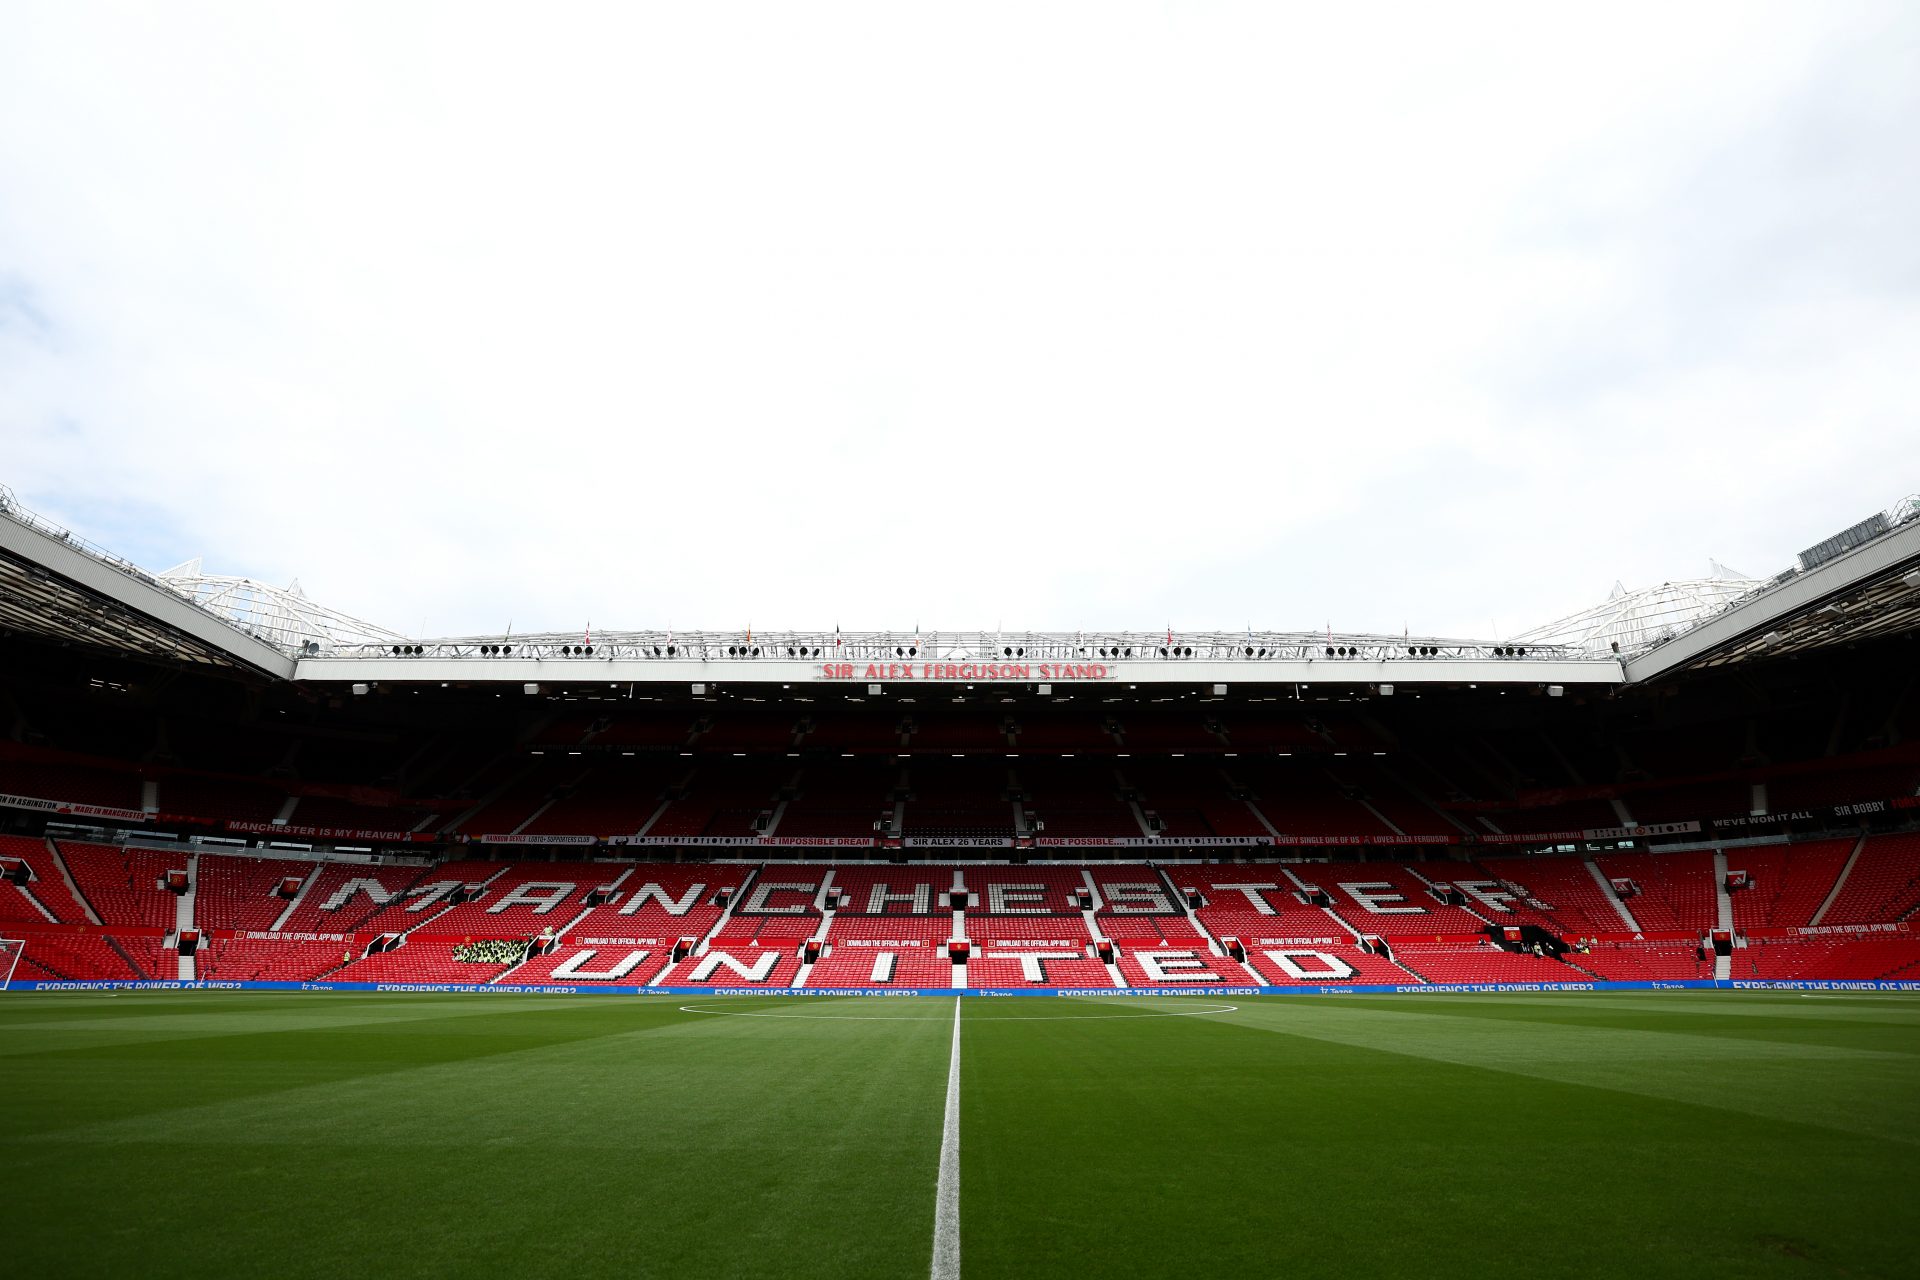 Manchester United's £2 billion plans to build a 100,000-seater stadium